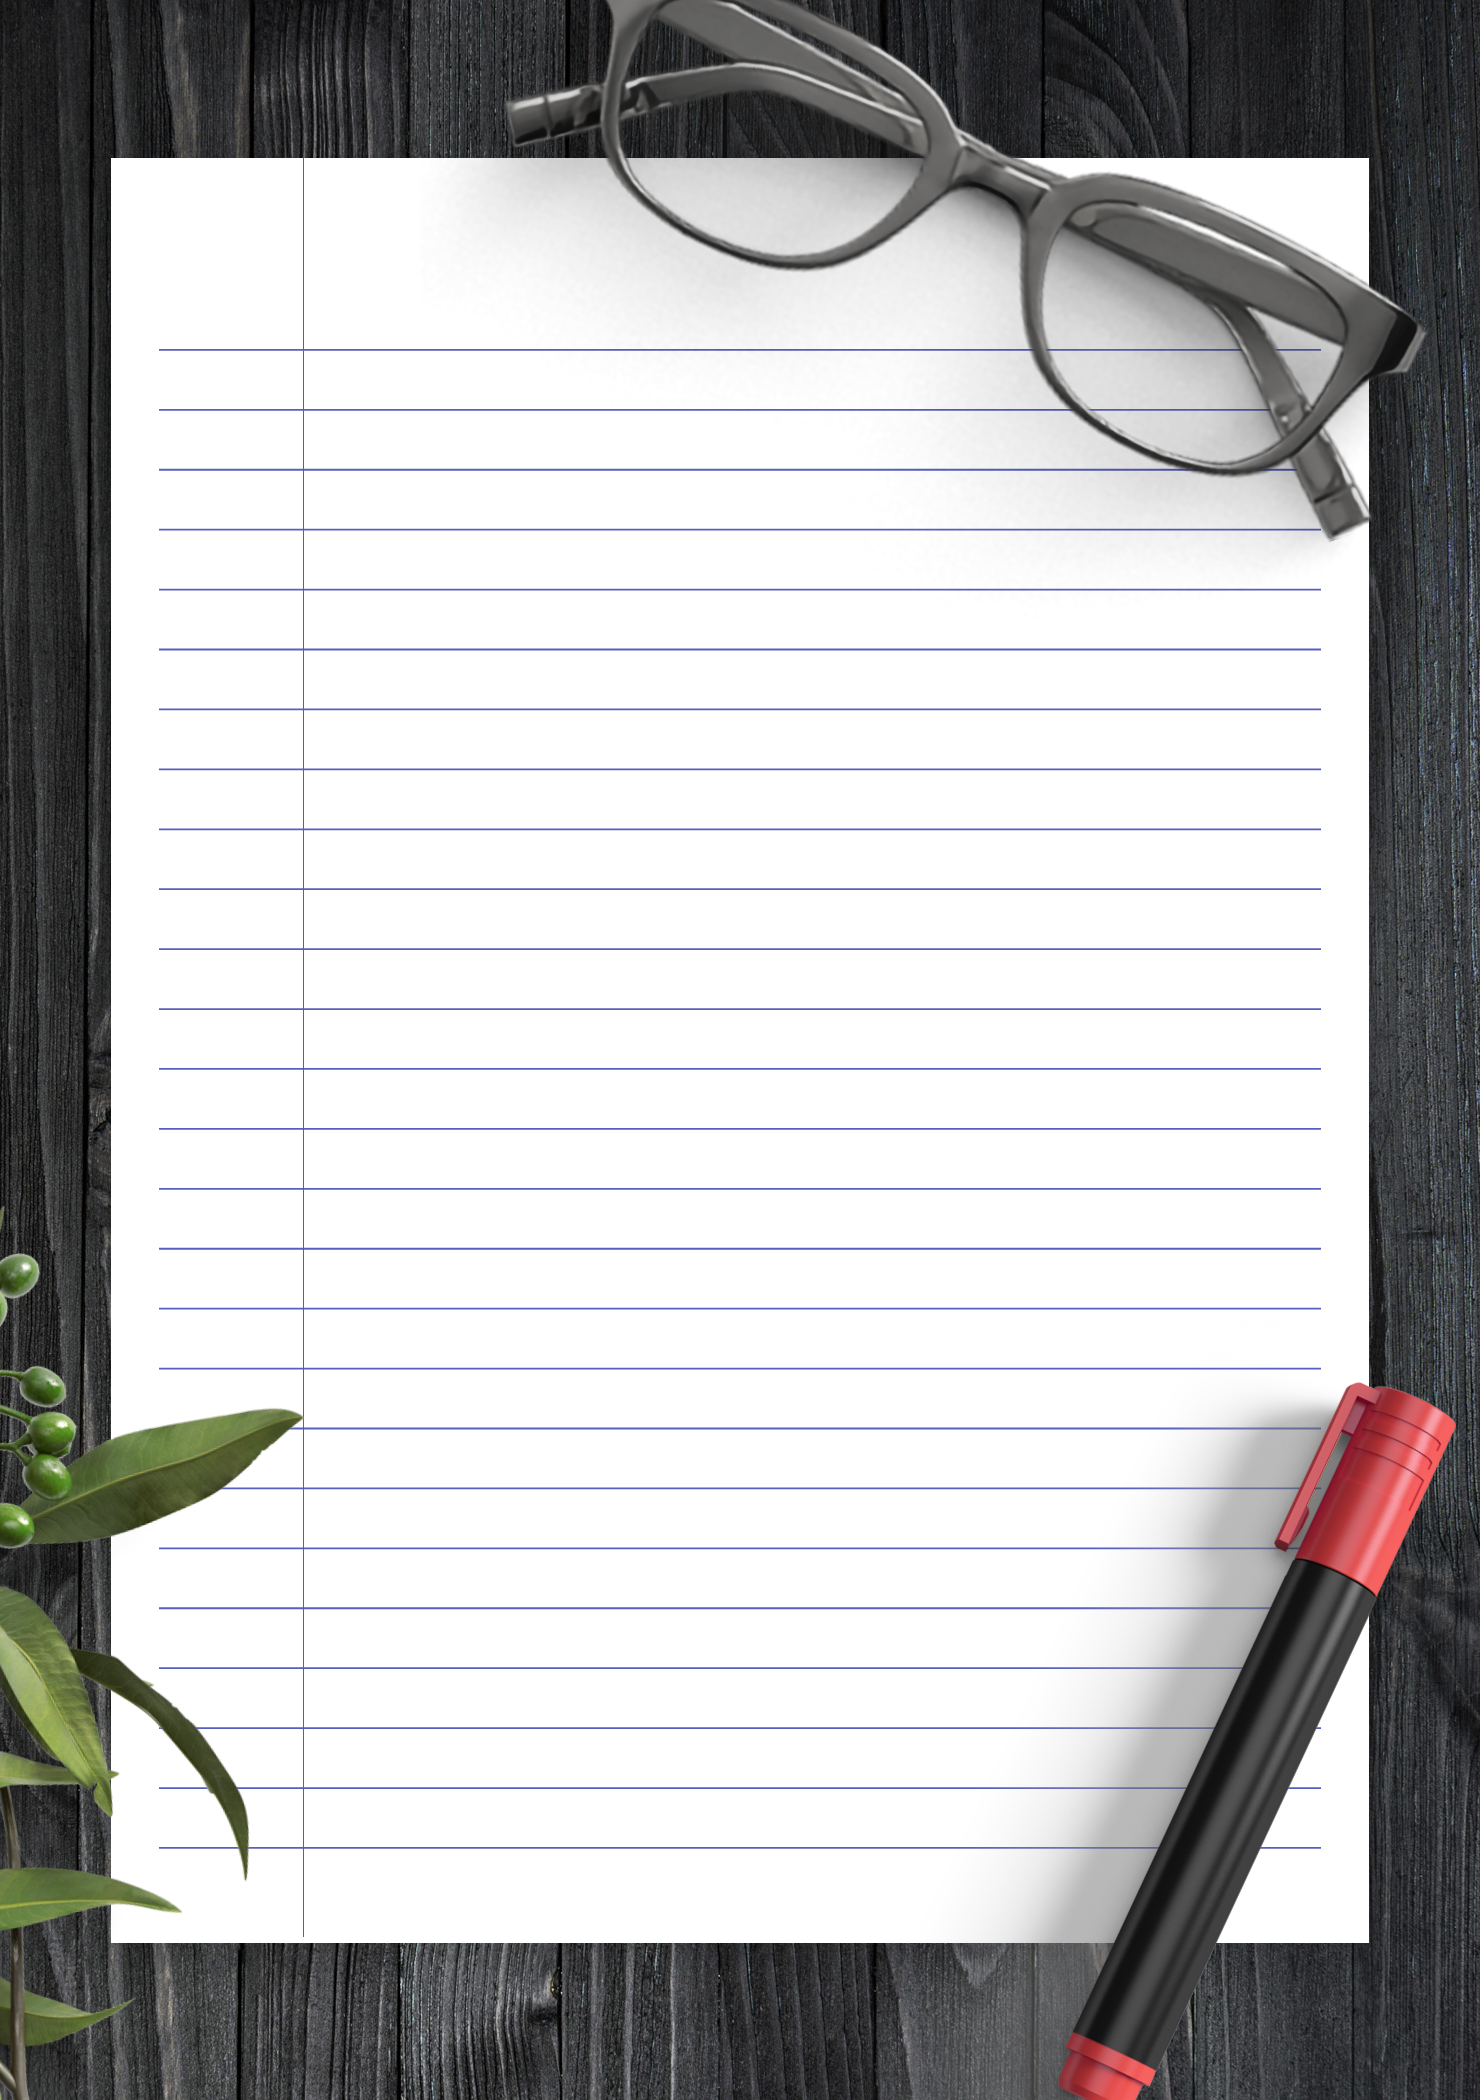 Ruled Paper Word Template